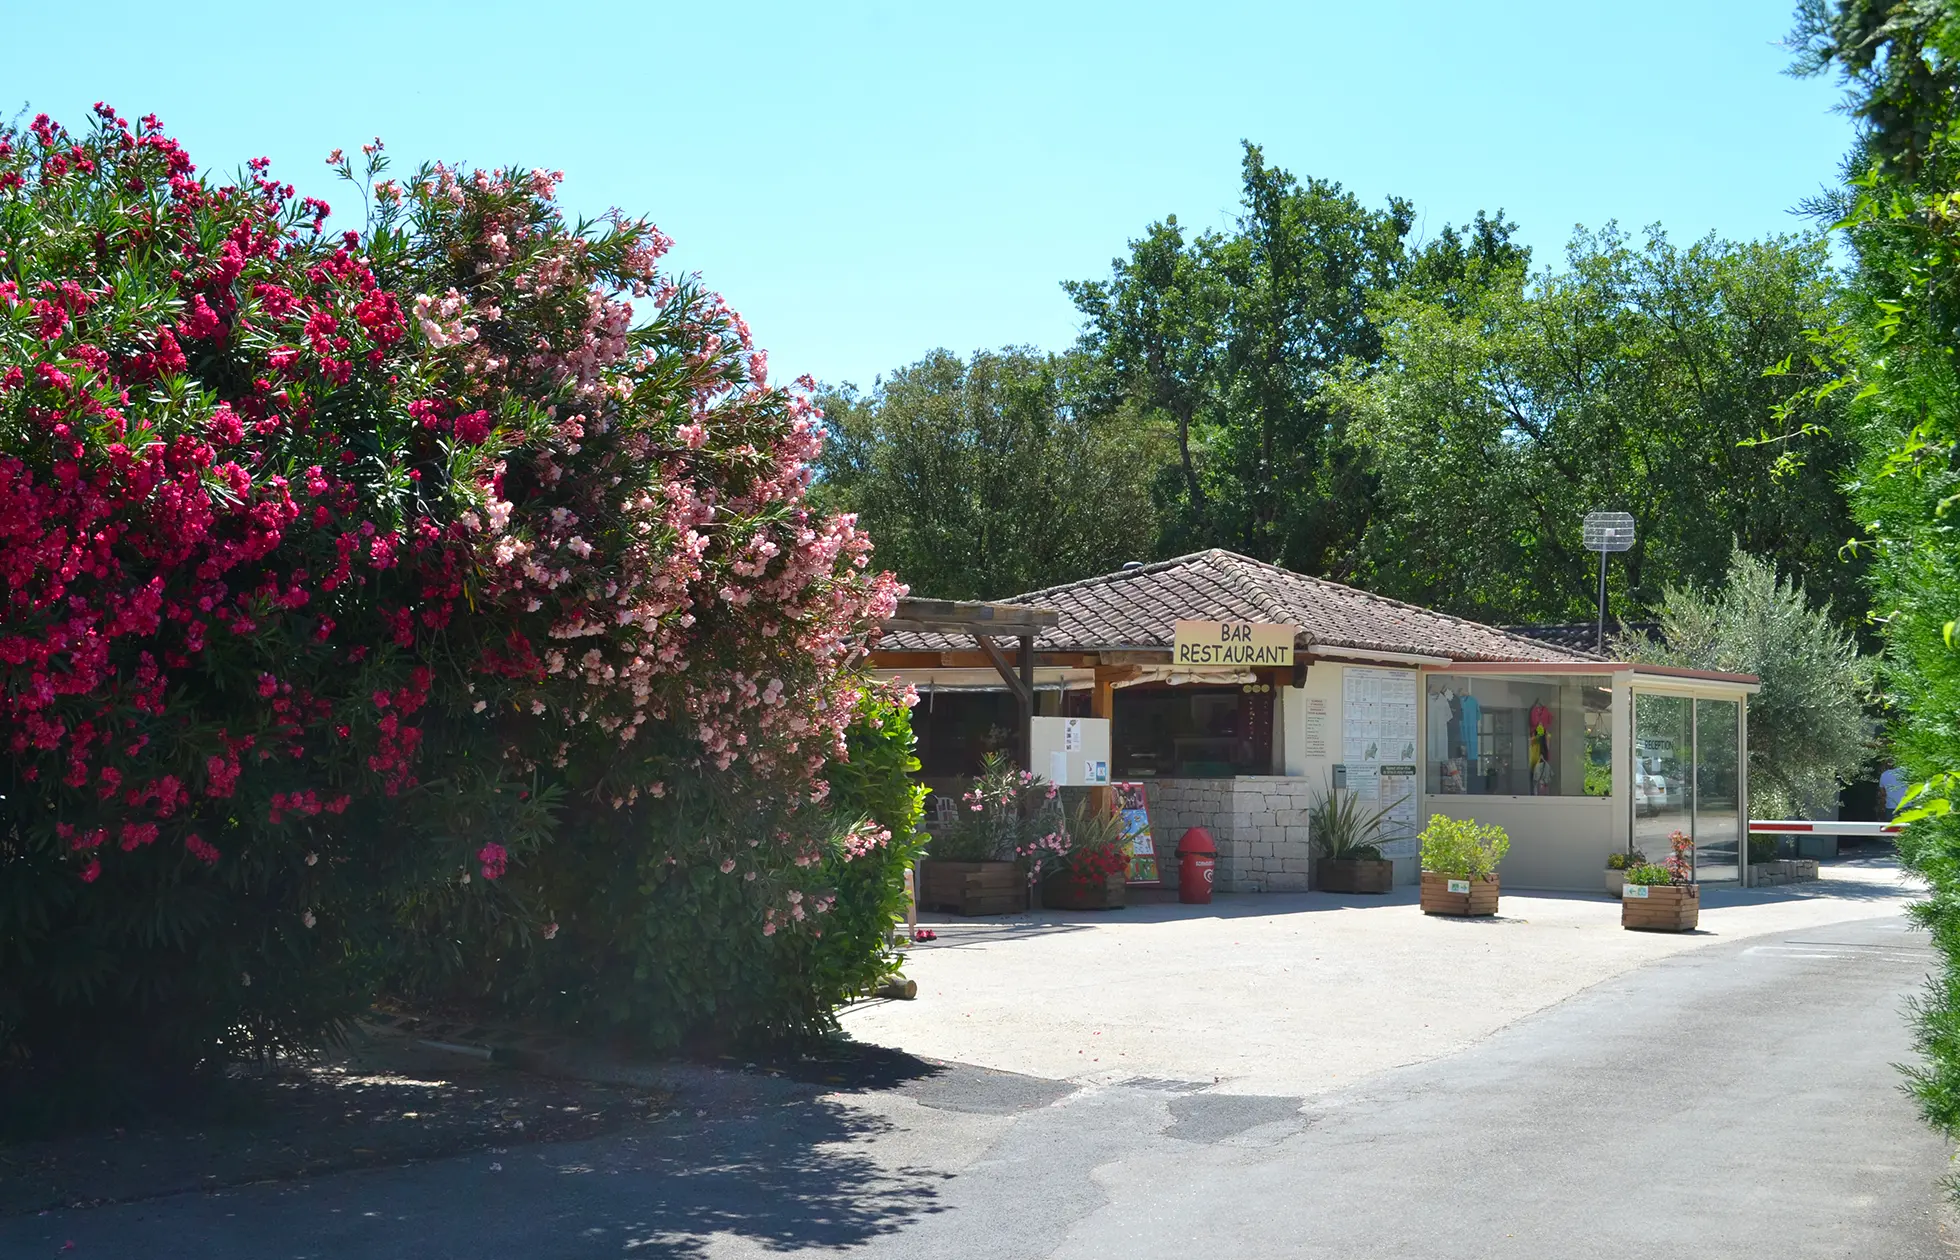 offer ' - '38 - Camping Le Saint Michelet - Service